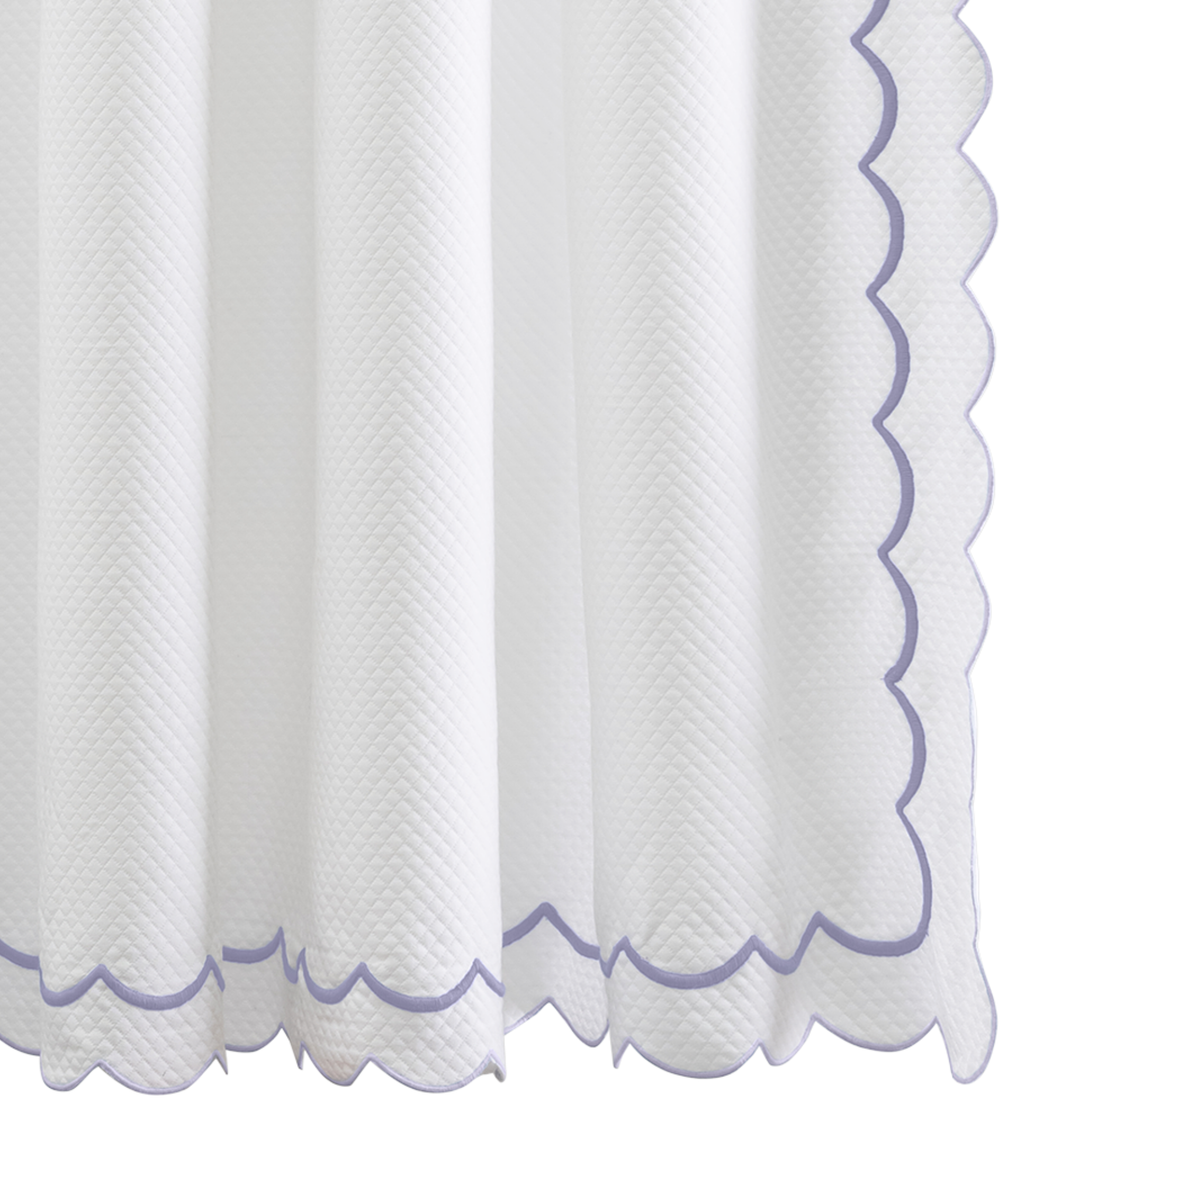 Hanging Edges of Matouk Indie Pique Shower Curtain in Lilac Color